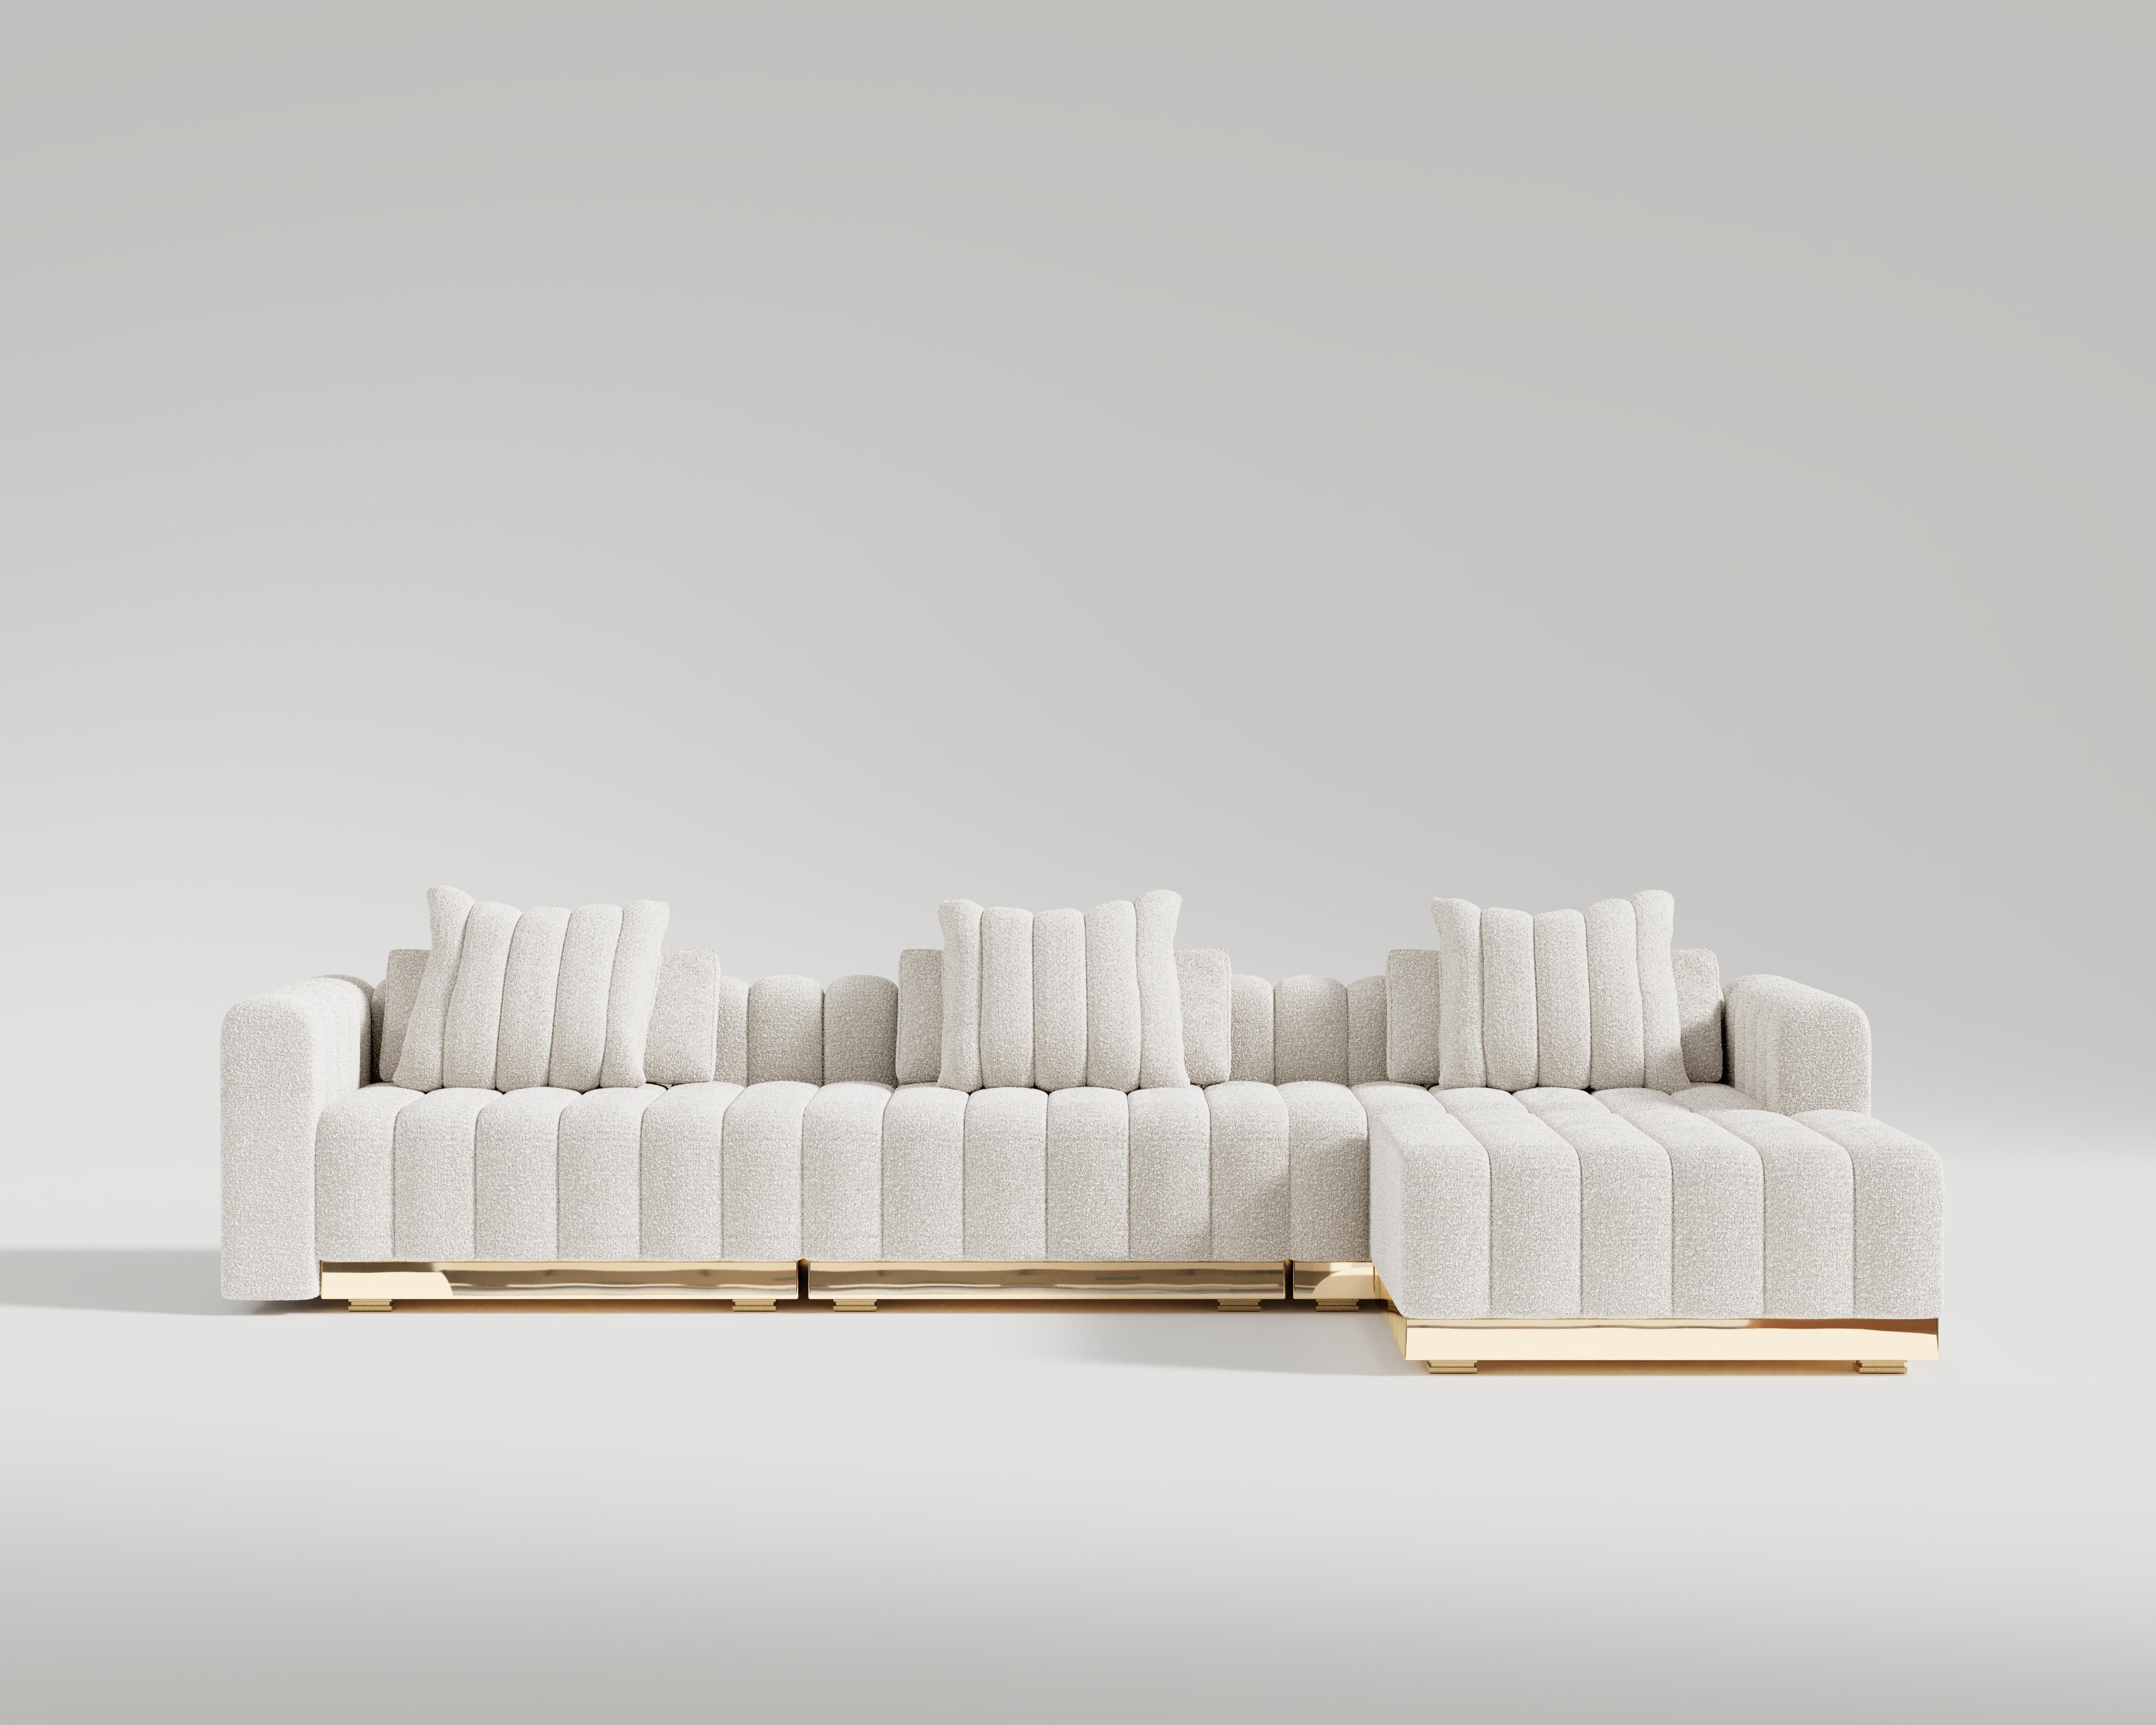 El Mar Sectional Sofa
Inspired by the waves of the sea, the powerful and magnificent design, with a unique bronze detailing on the base makes it elegant. Fall back into the luxurious and supple feel of the EL Mar Modular Sectional. the refined